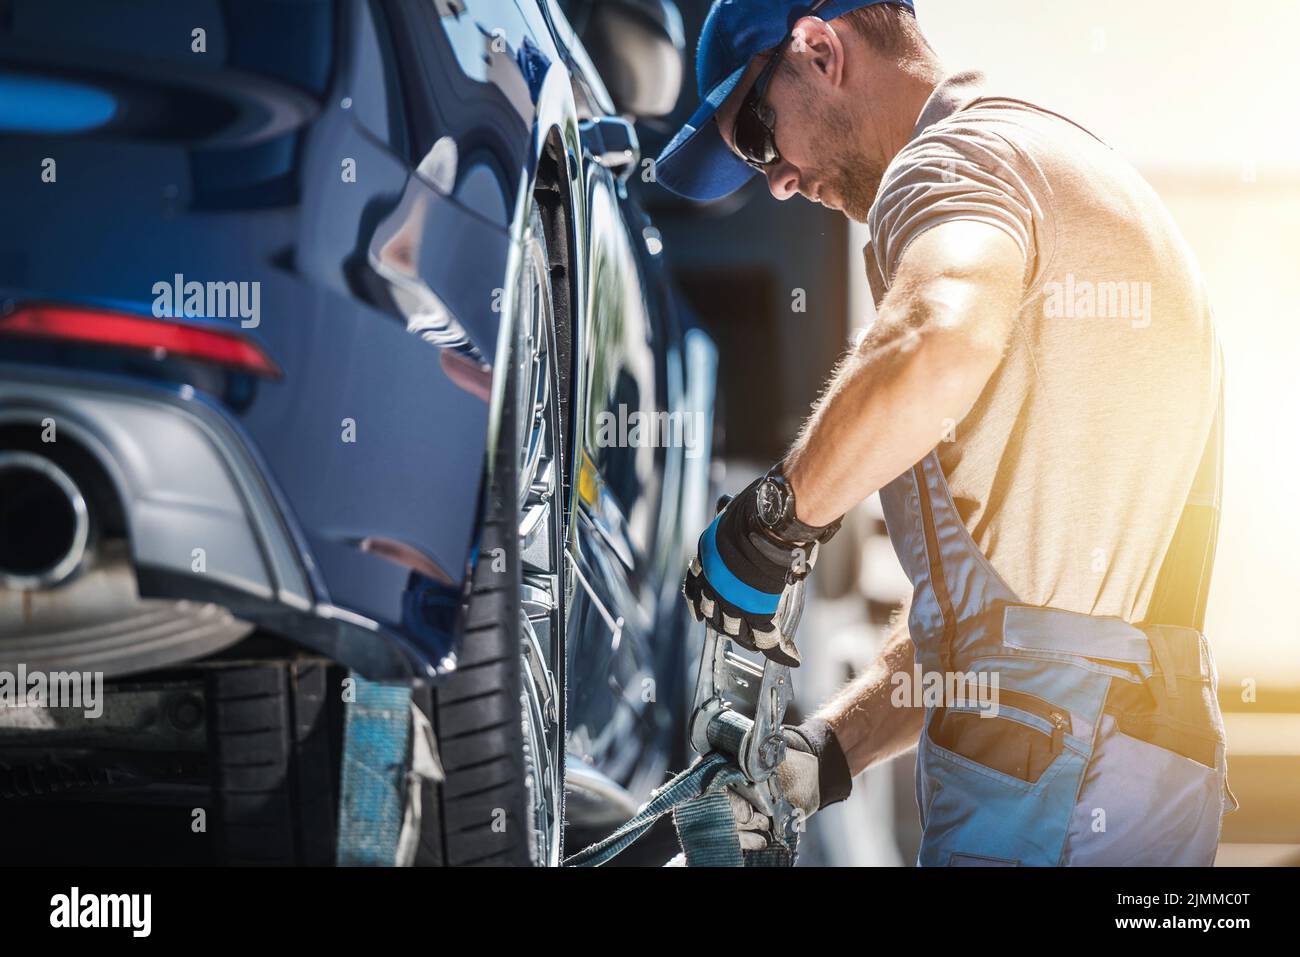 Caucasian Towing Worker Fastening Broken Vehicle with Tie Down Straps. Professional Roadside Assistance and Breakdown Coverage Services. Automotive an Stock Photo